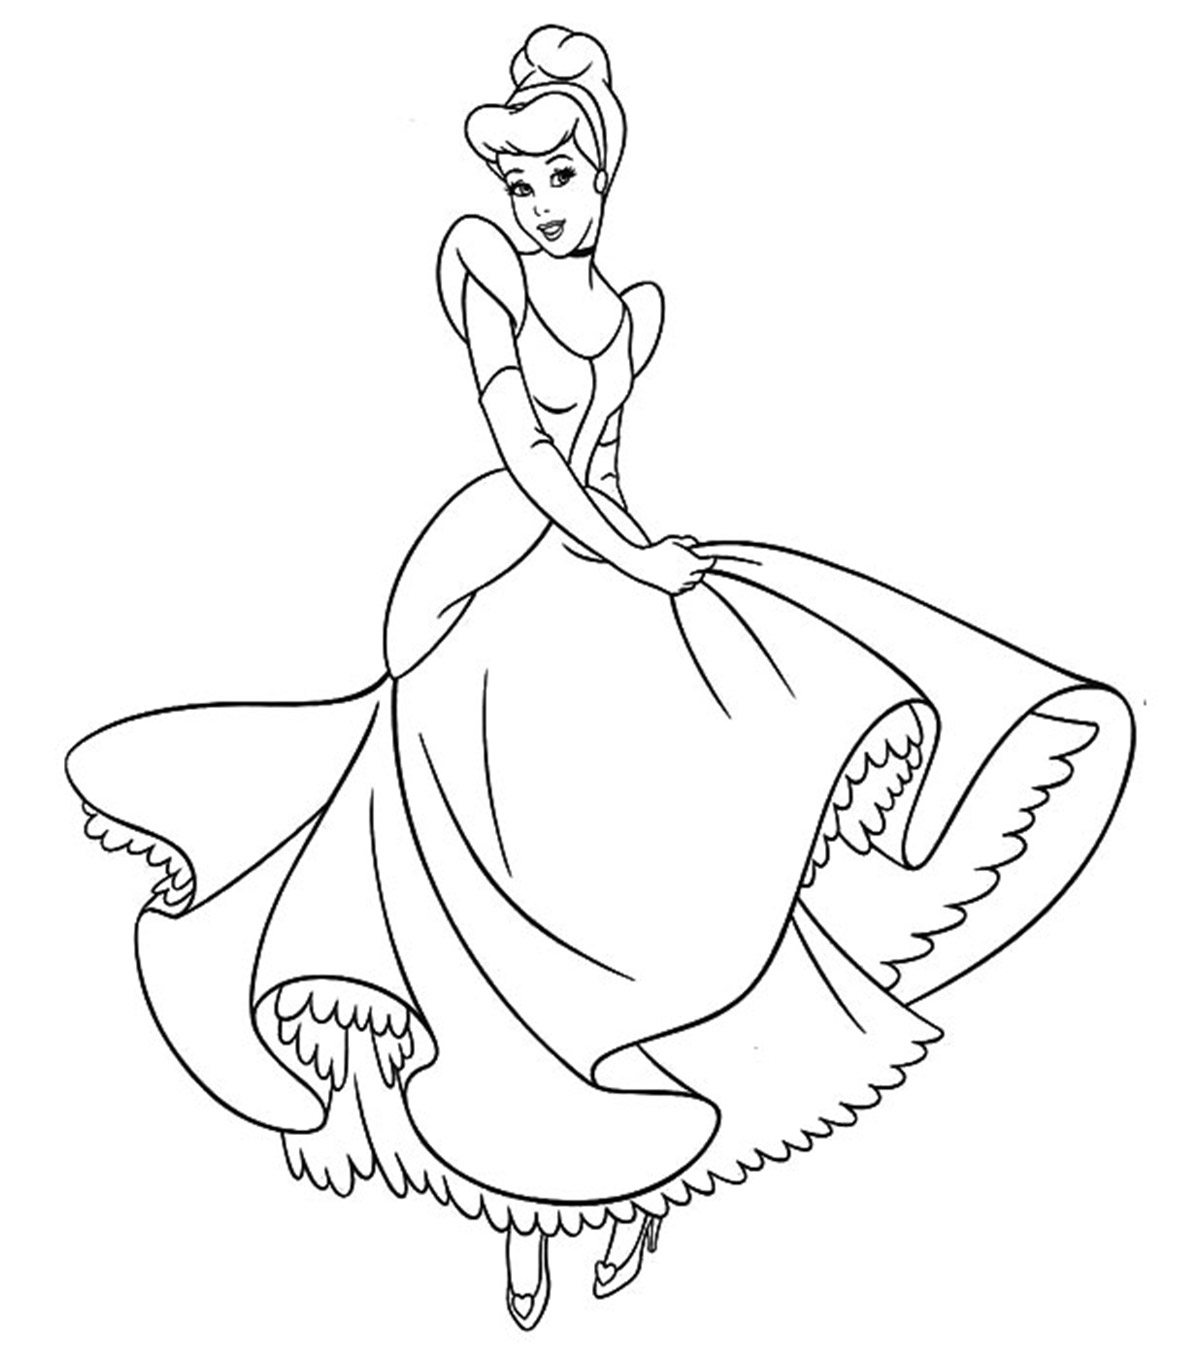 Free Cinderella Coloring Pages Top 25 Free Printable Cinderella Coloring Pages Online